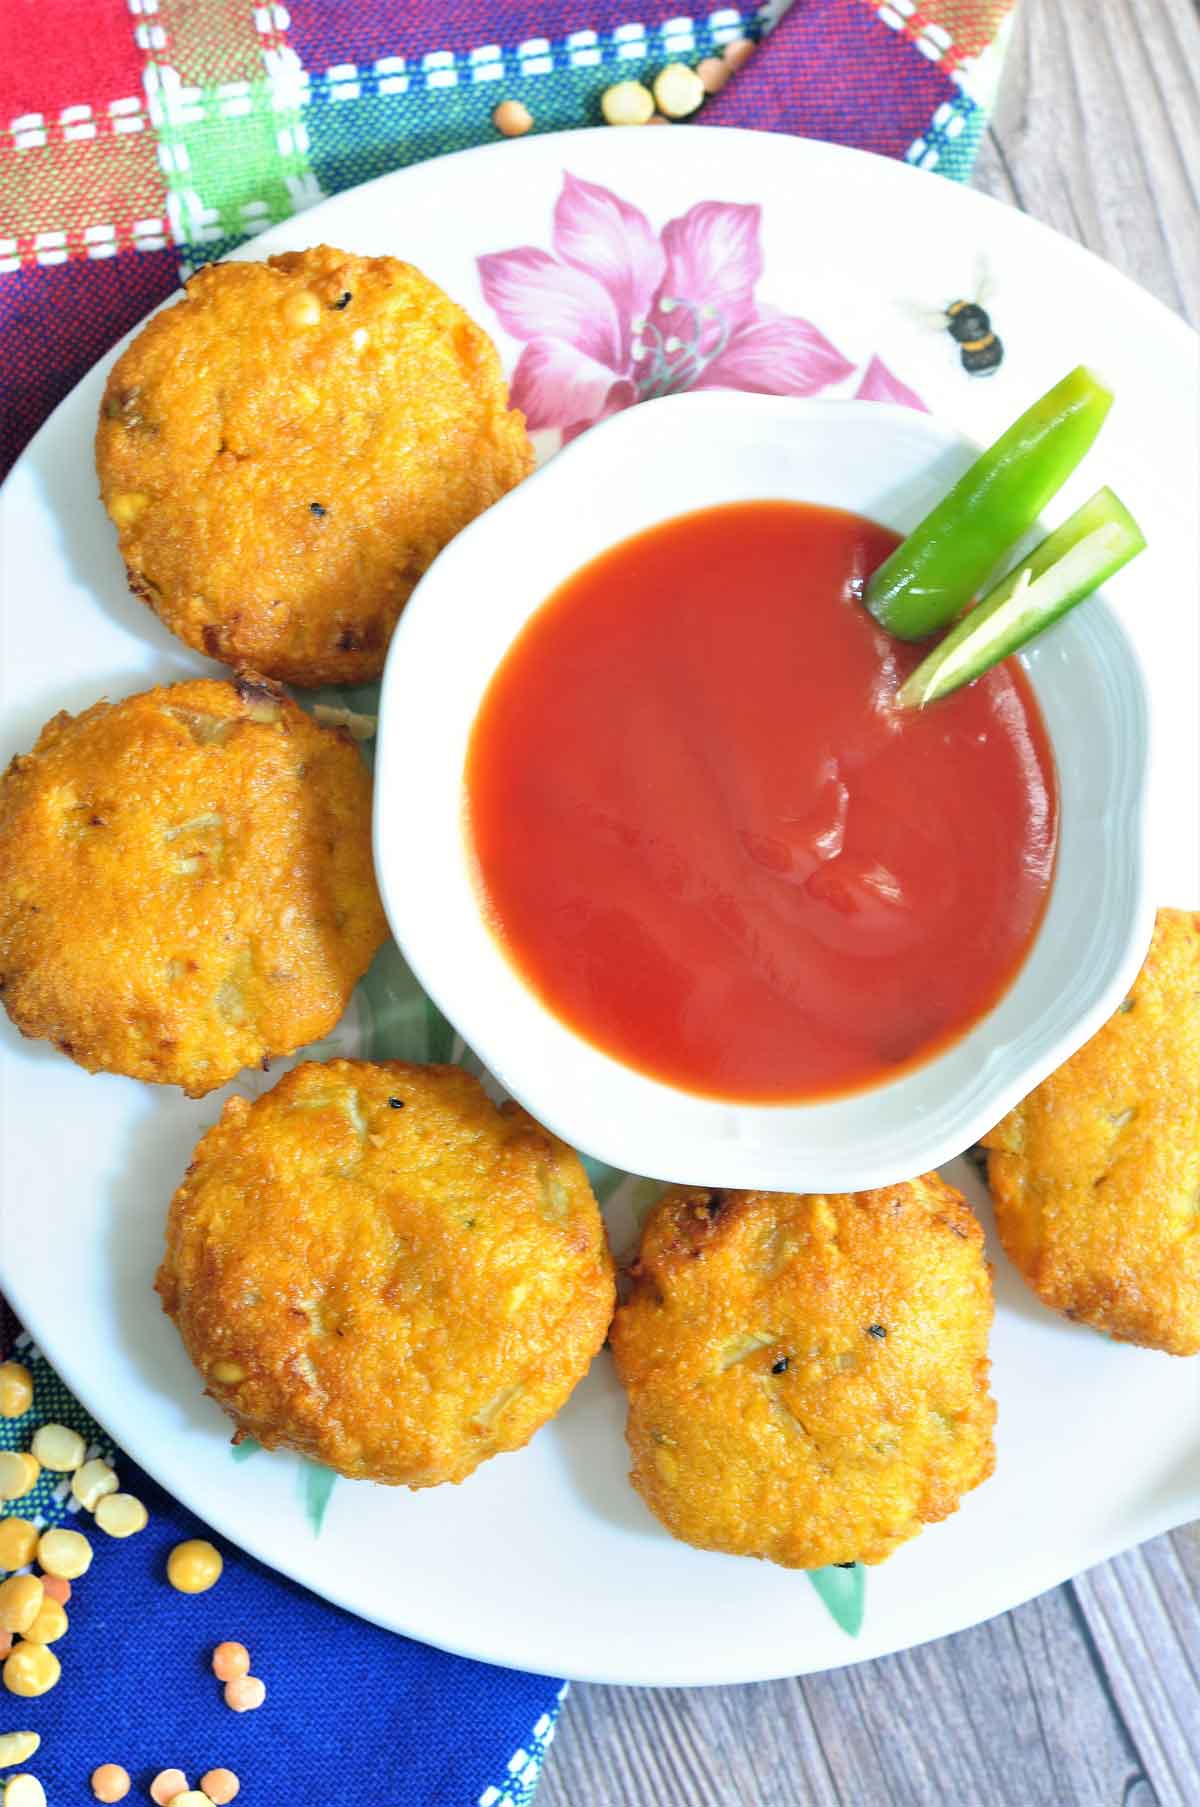 Five lentil fritters served in a plate with ketchup on the side.